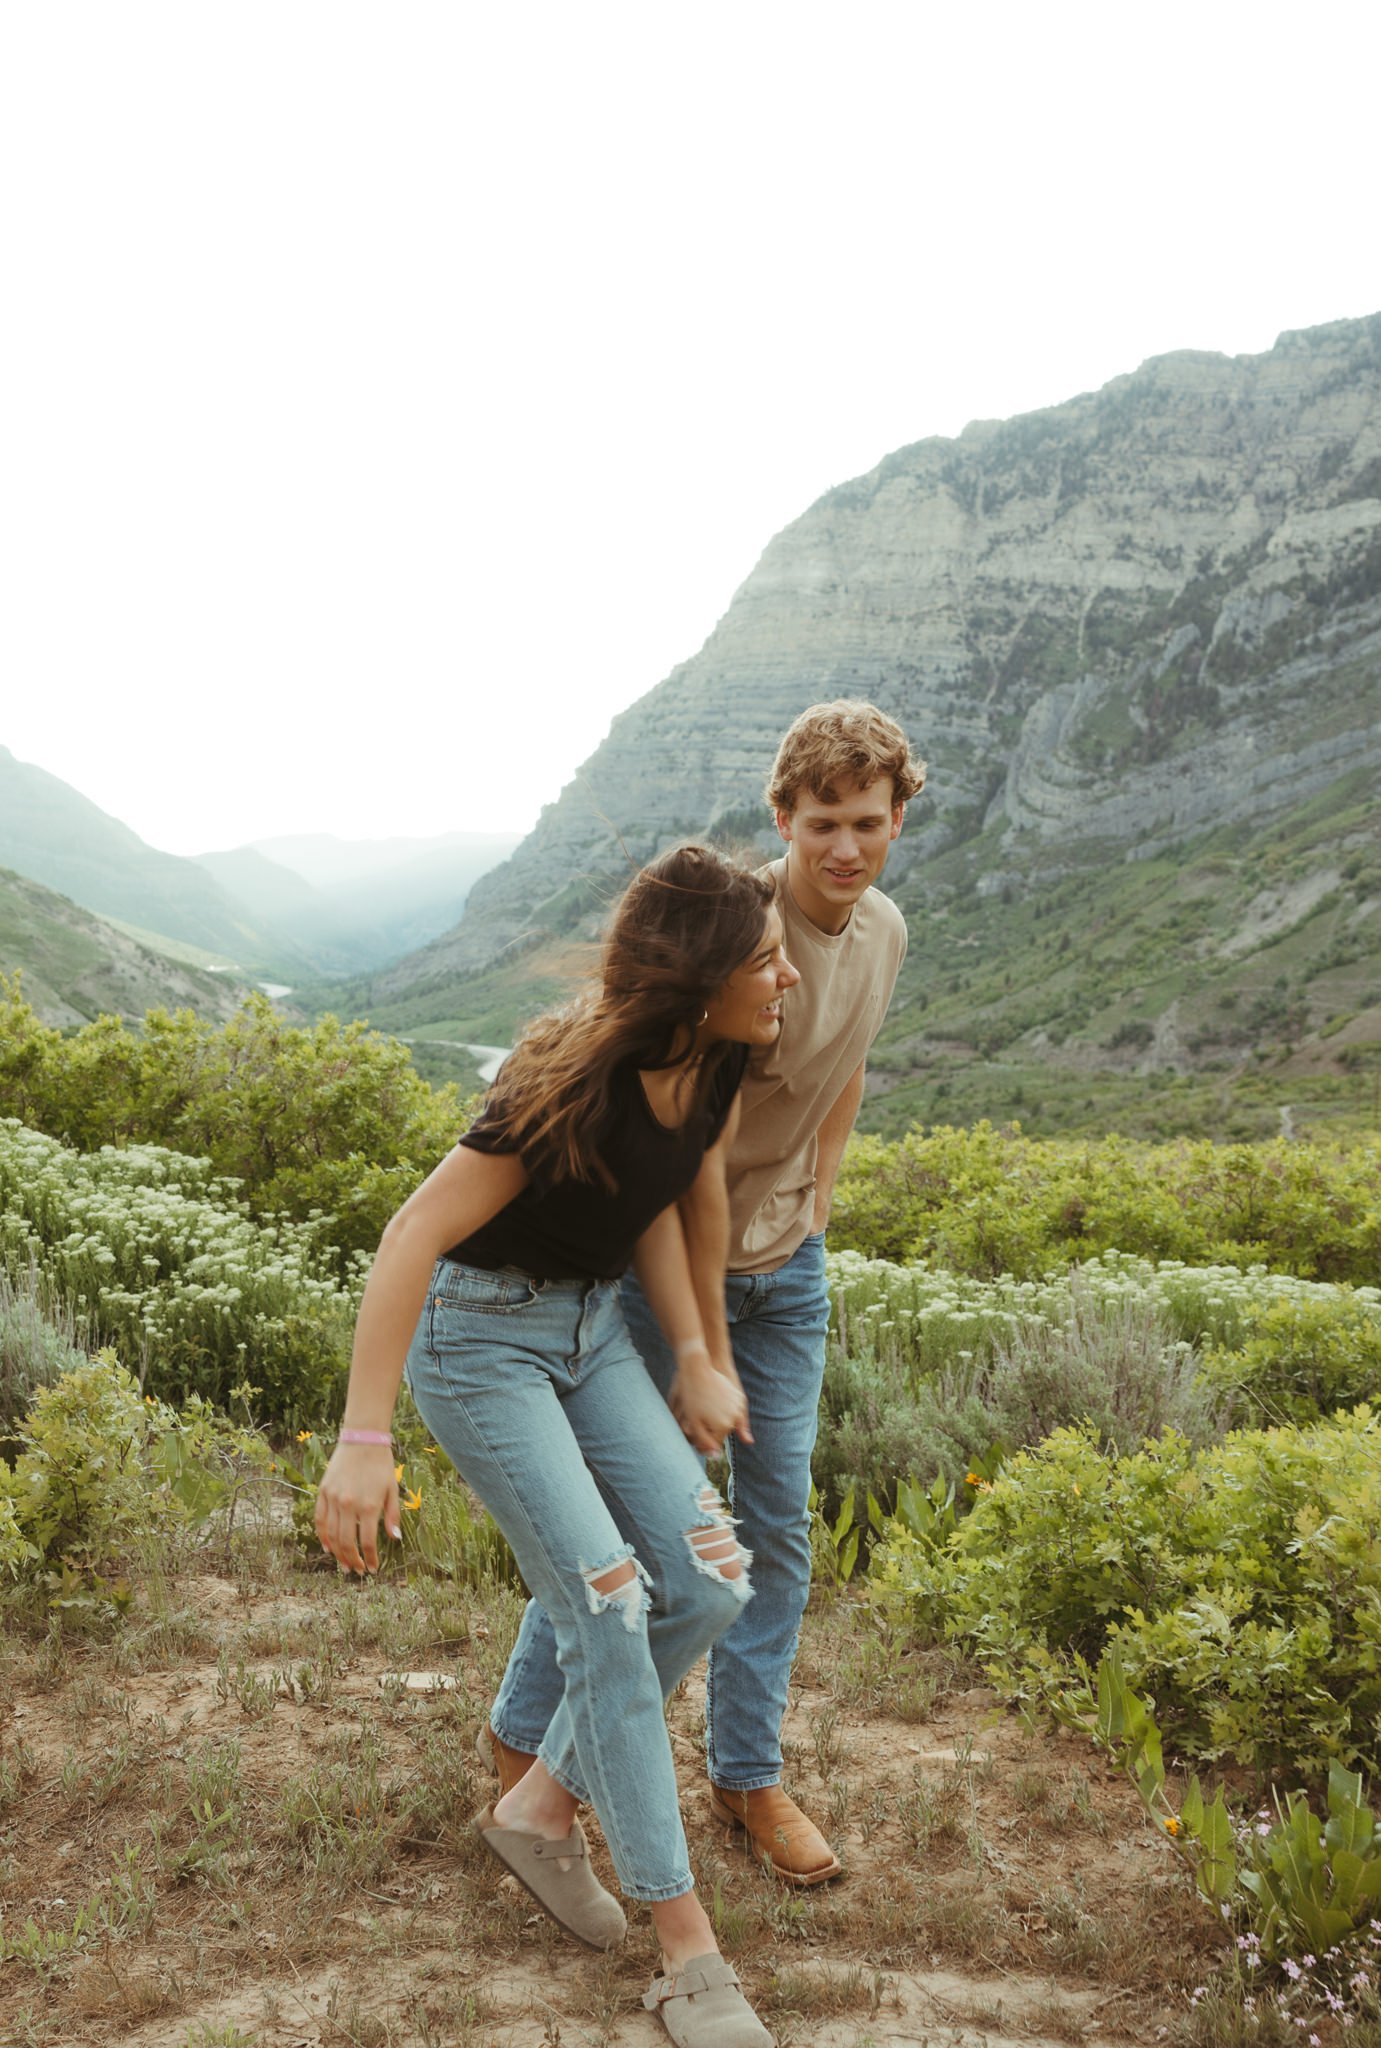 Spring-Provo-Canyon-Wildflowers-Engagement-Session-27